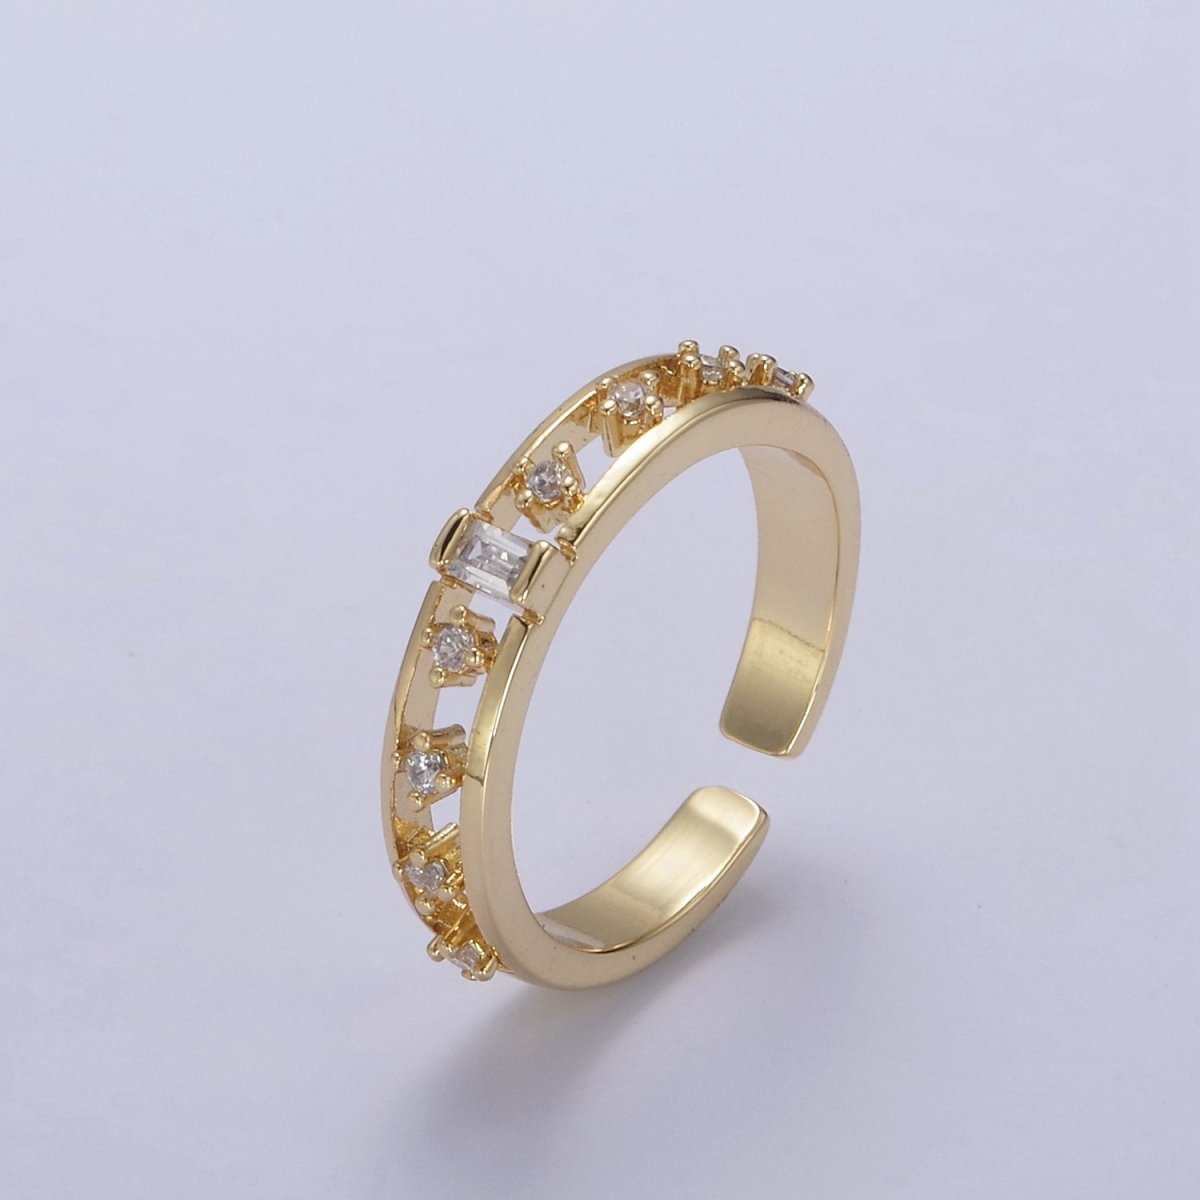 Minimalist Cz Open Adjustable Ring In 14k Gold Filled for Stackable Jewelry U-323 - DLUXCA